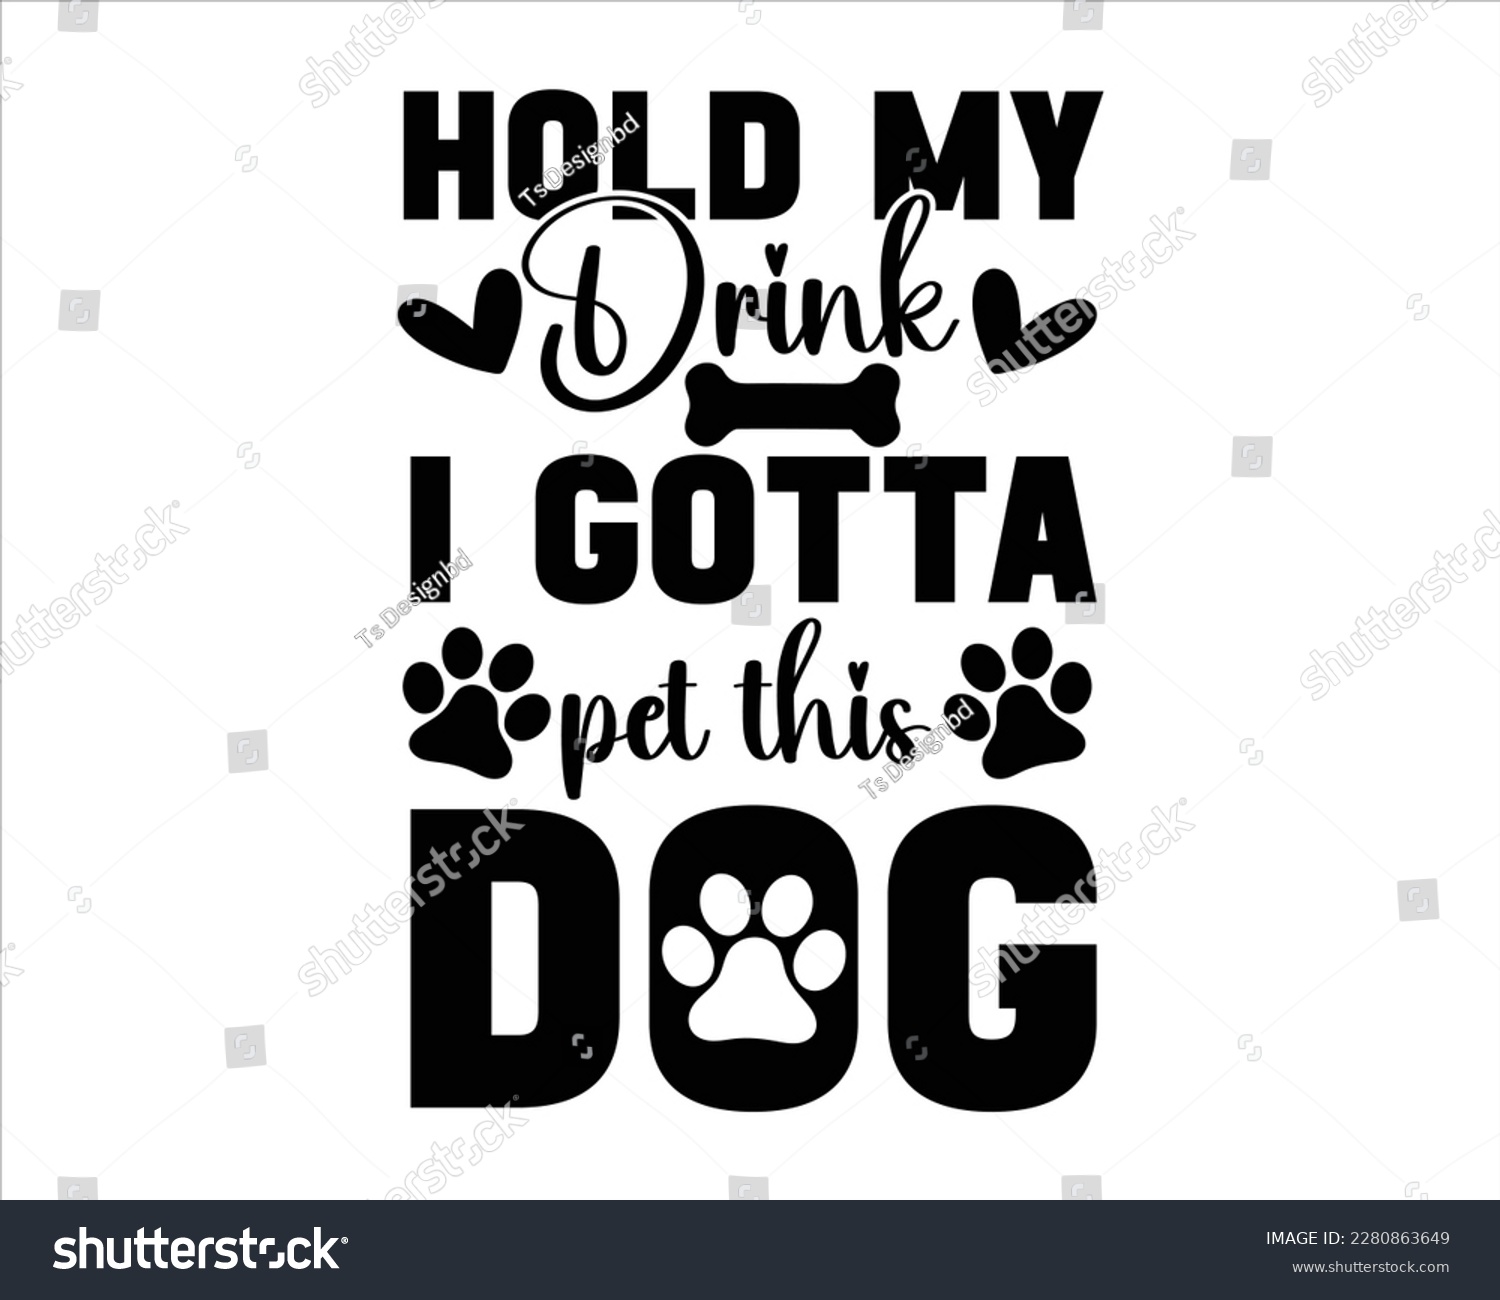 SVG of Hold My Drink I Gotta Pet This Dog Svg design,Funny Dog Quotes SVG Designs,Cute Dog quotes SVG cut files,Touching Dog quotes t-shirt designs,fur mom svg.Cut Files, Silhouette svg